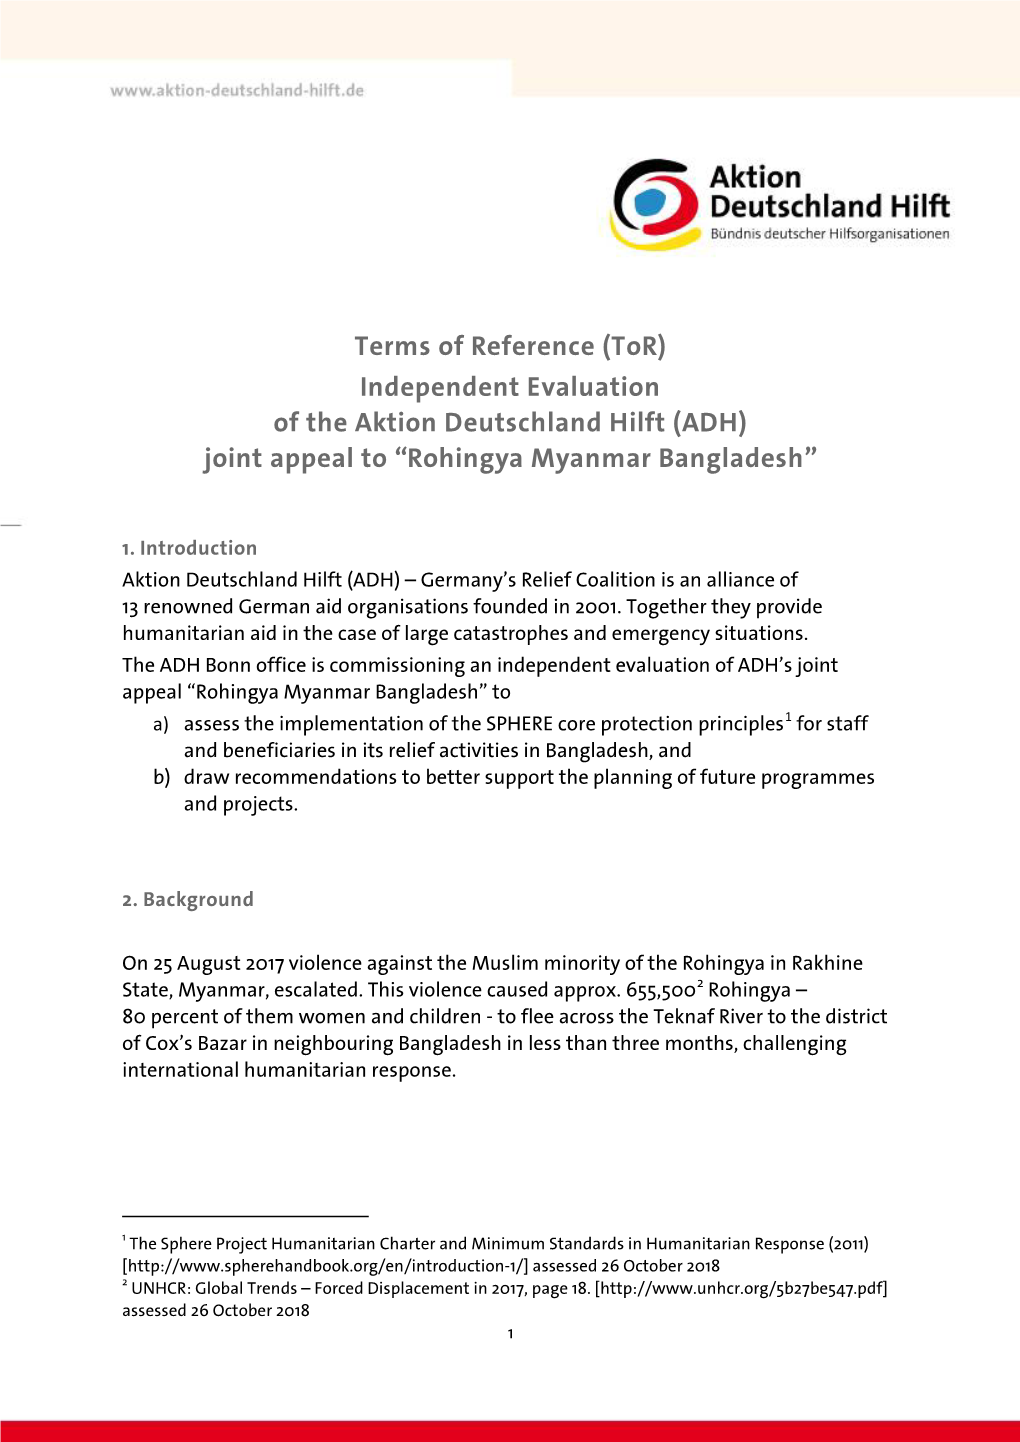 Terms of Reference (Tor) Independent Evaluation of the Aktion Deutschland Hilft (ADH) Joint Appeal to “Rohingya Myanmar Bangladesh”